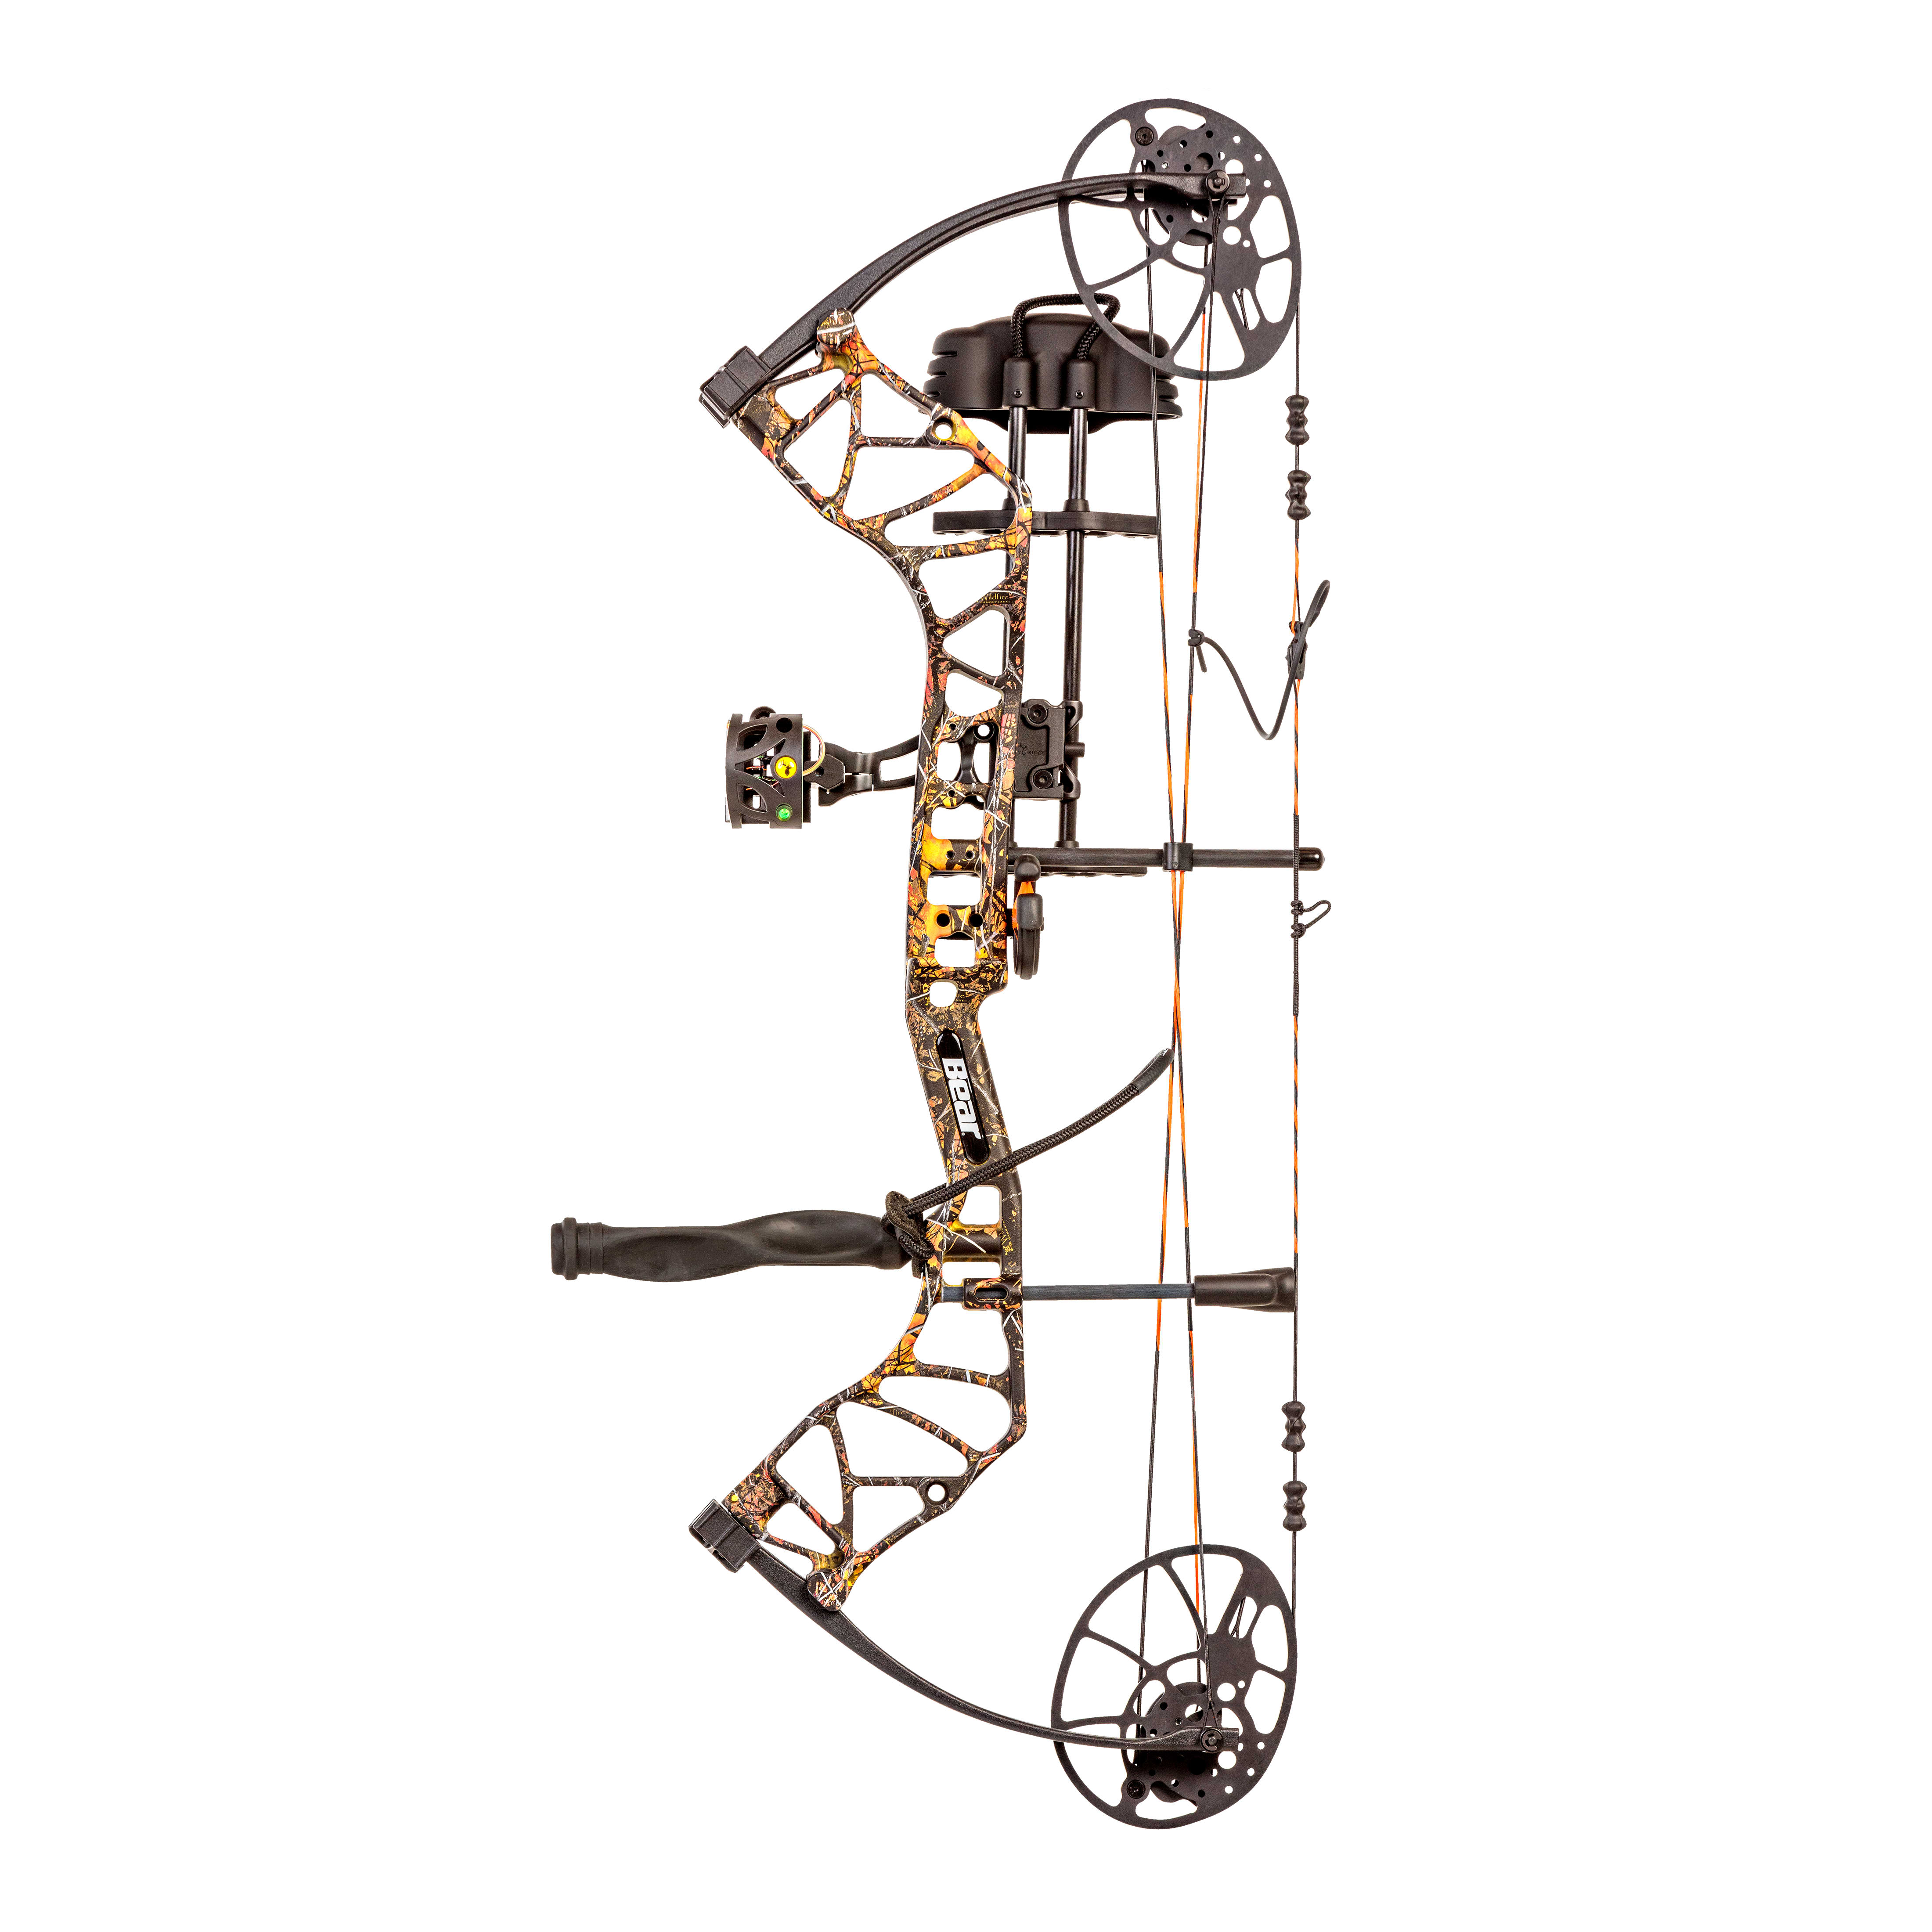 Bear® Archery Legit Compound Bow Package - Wildfire Camo